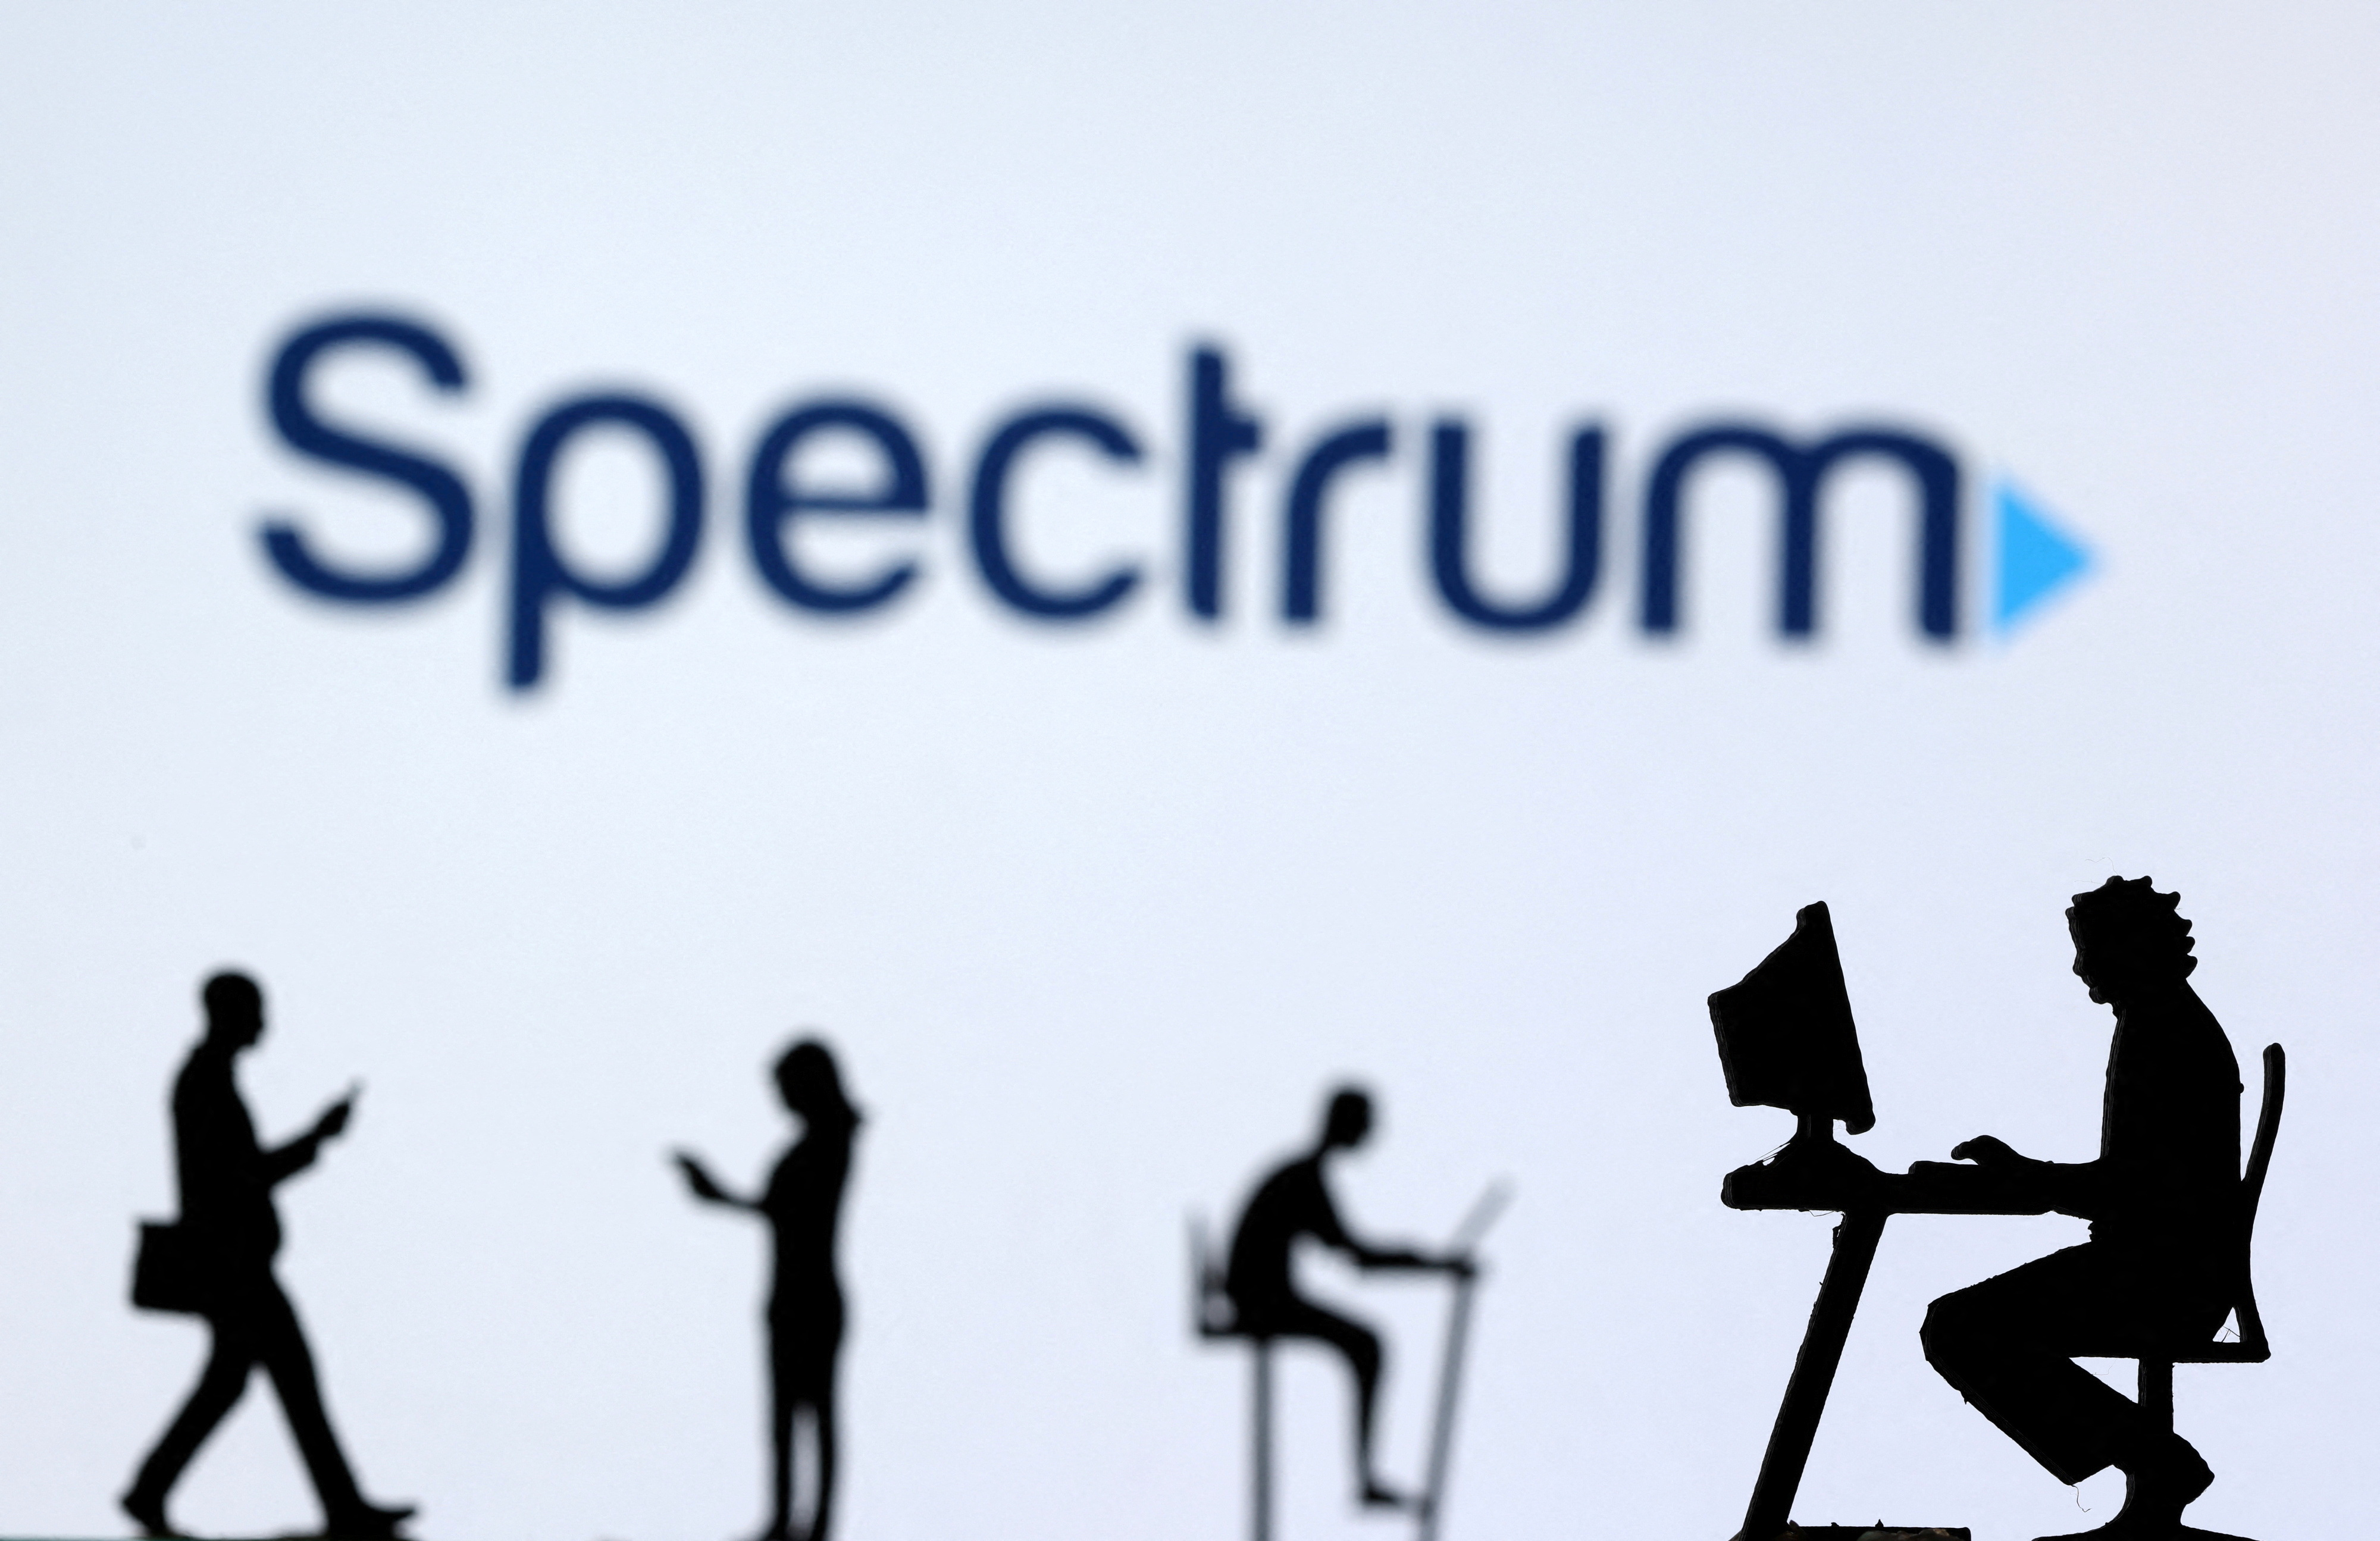 What is Charters Spectrum-Disney dispute over the future of TV? Reuters